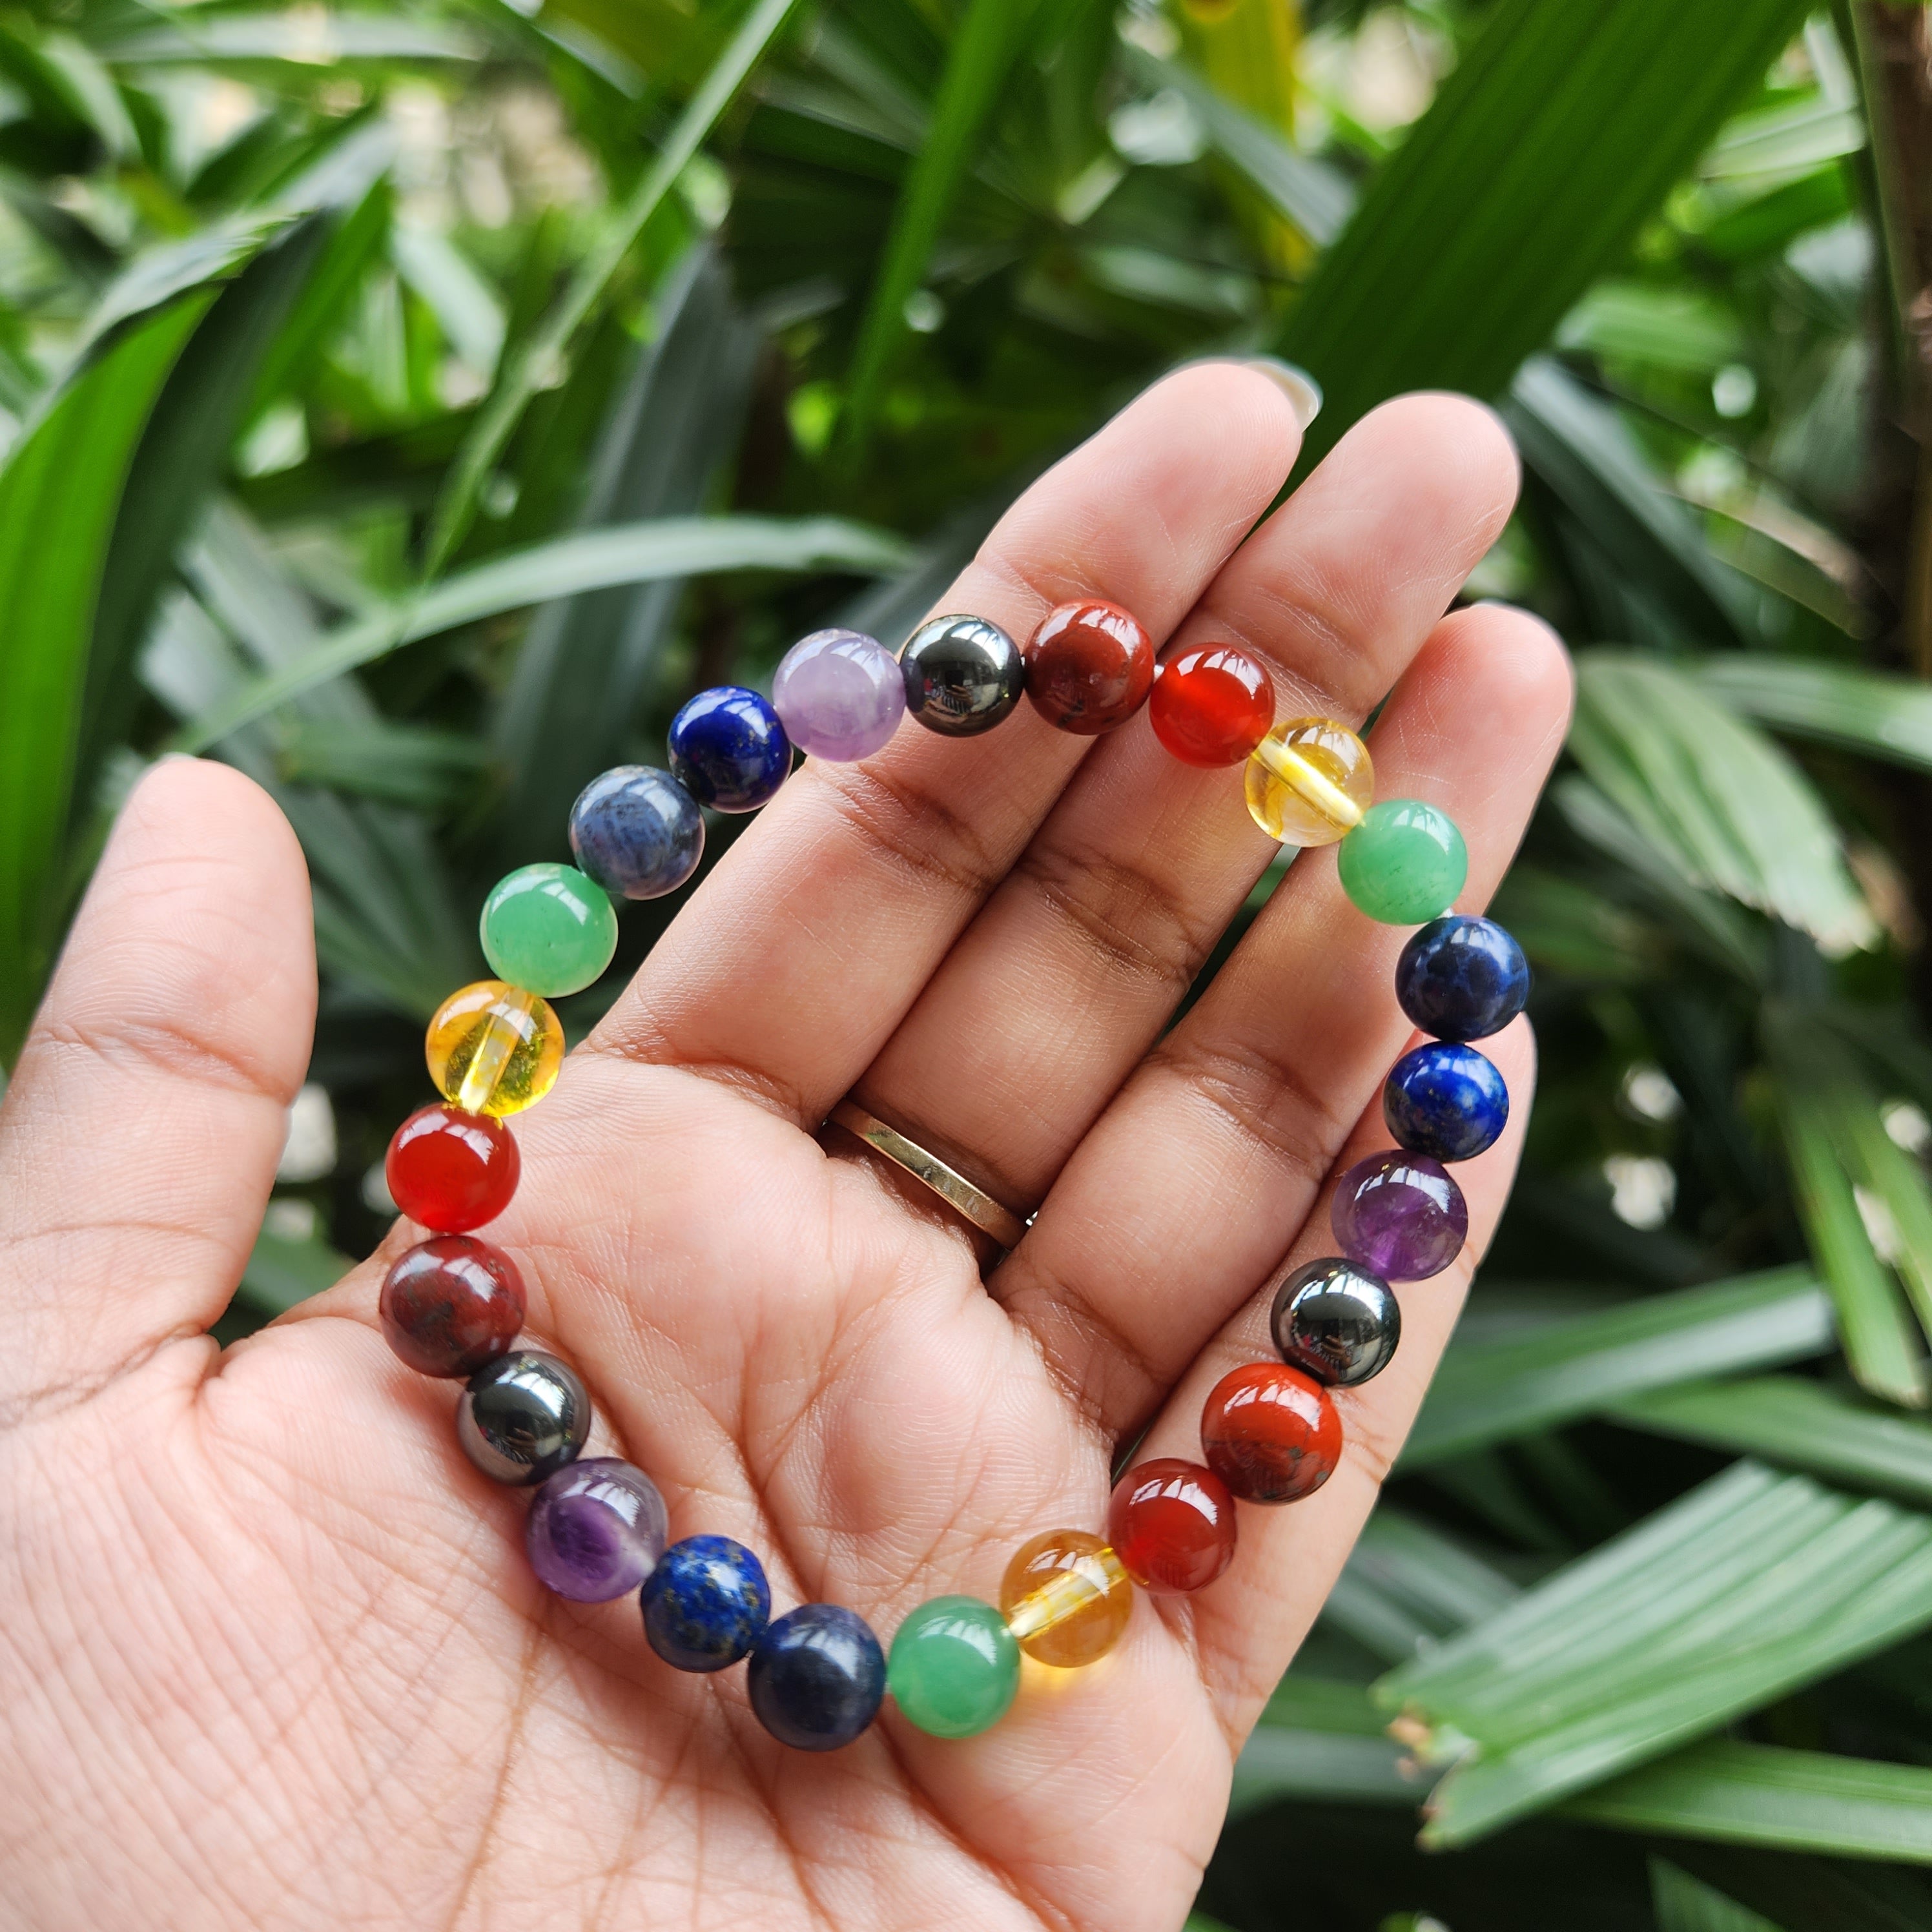 Certified 7 Chakra 8mm Natural Stone Bracelet With Lava Stone - One  Bracelet For Each Chakra